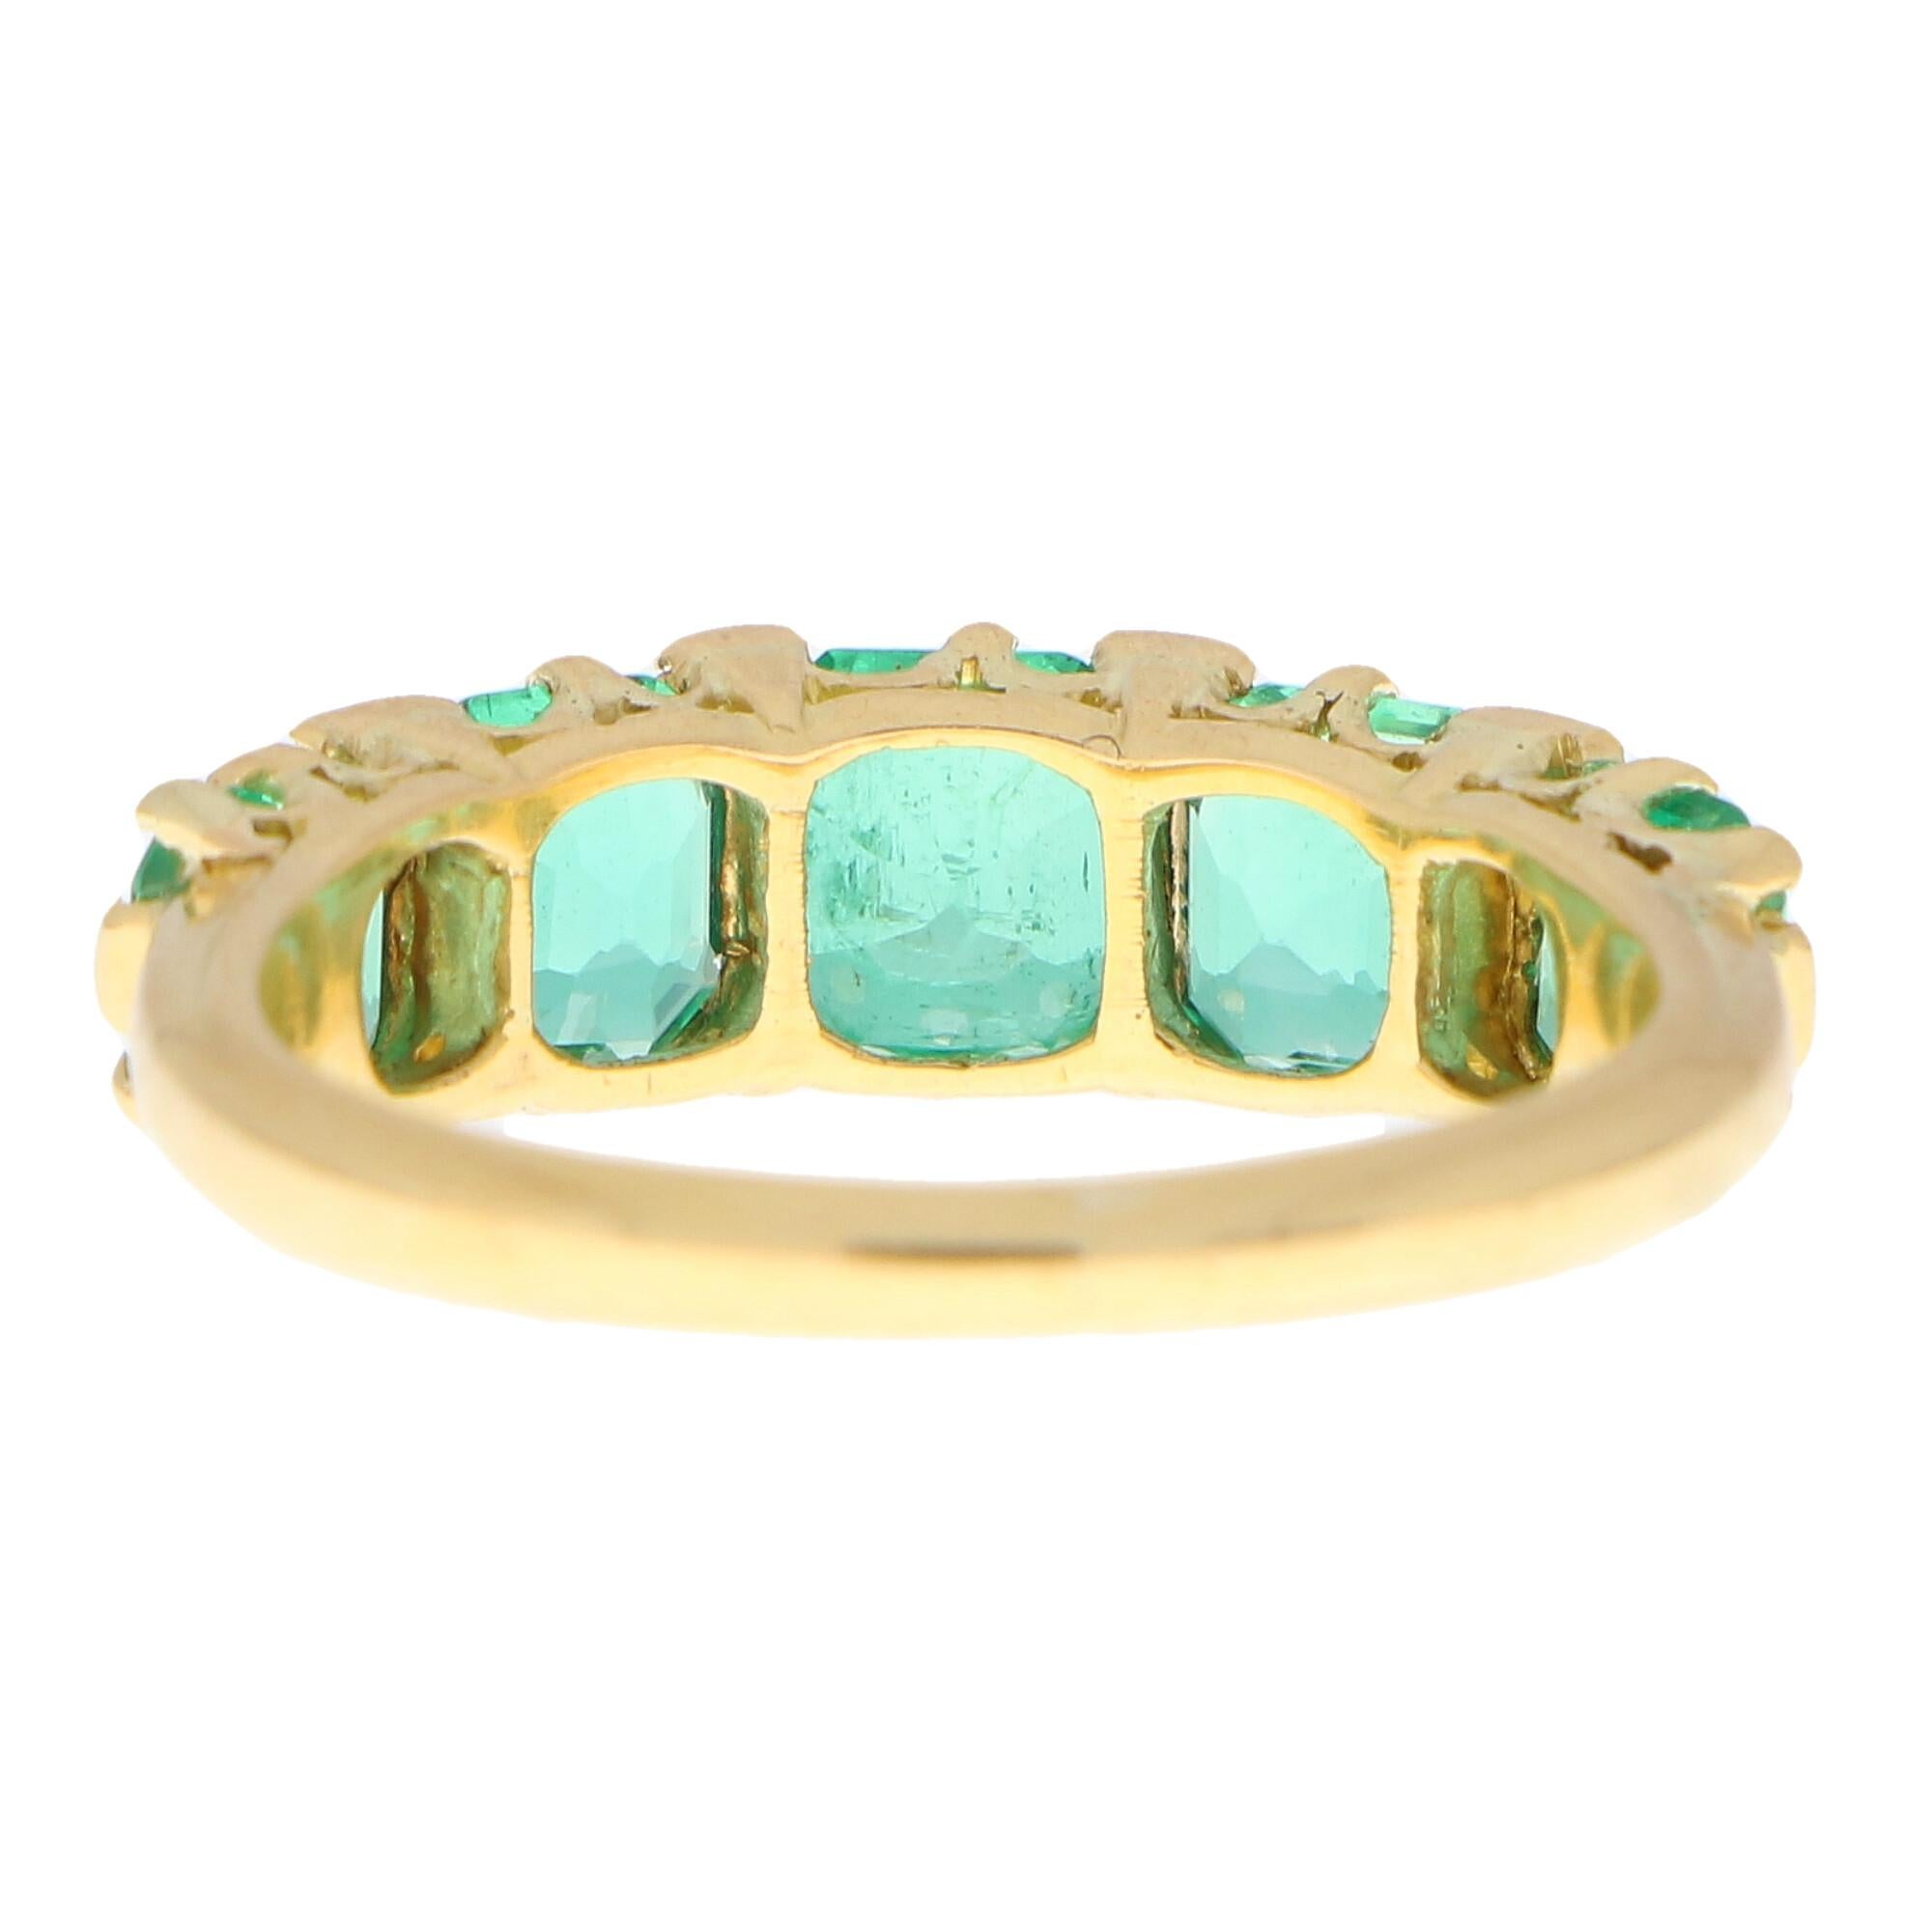 Late Victorian Emerald and Diamond Five Stone Ring Set in 18k Yellow Gold 2